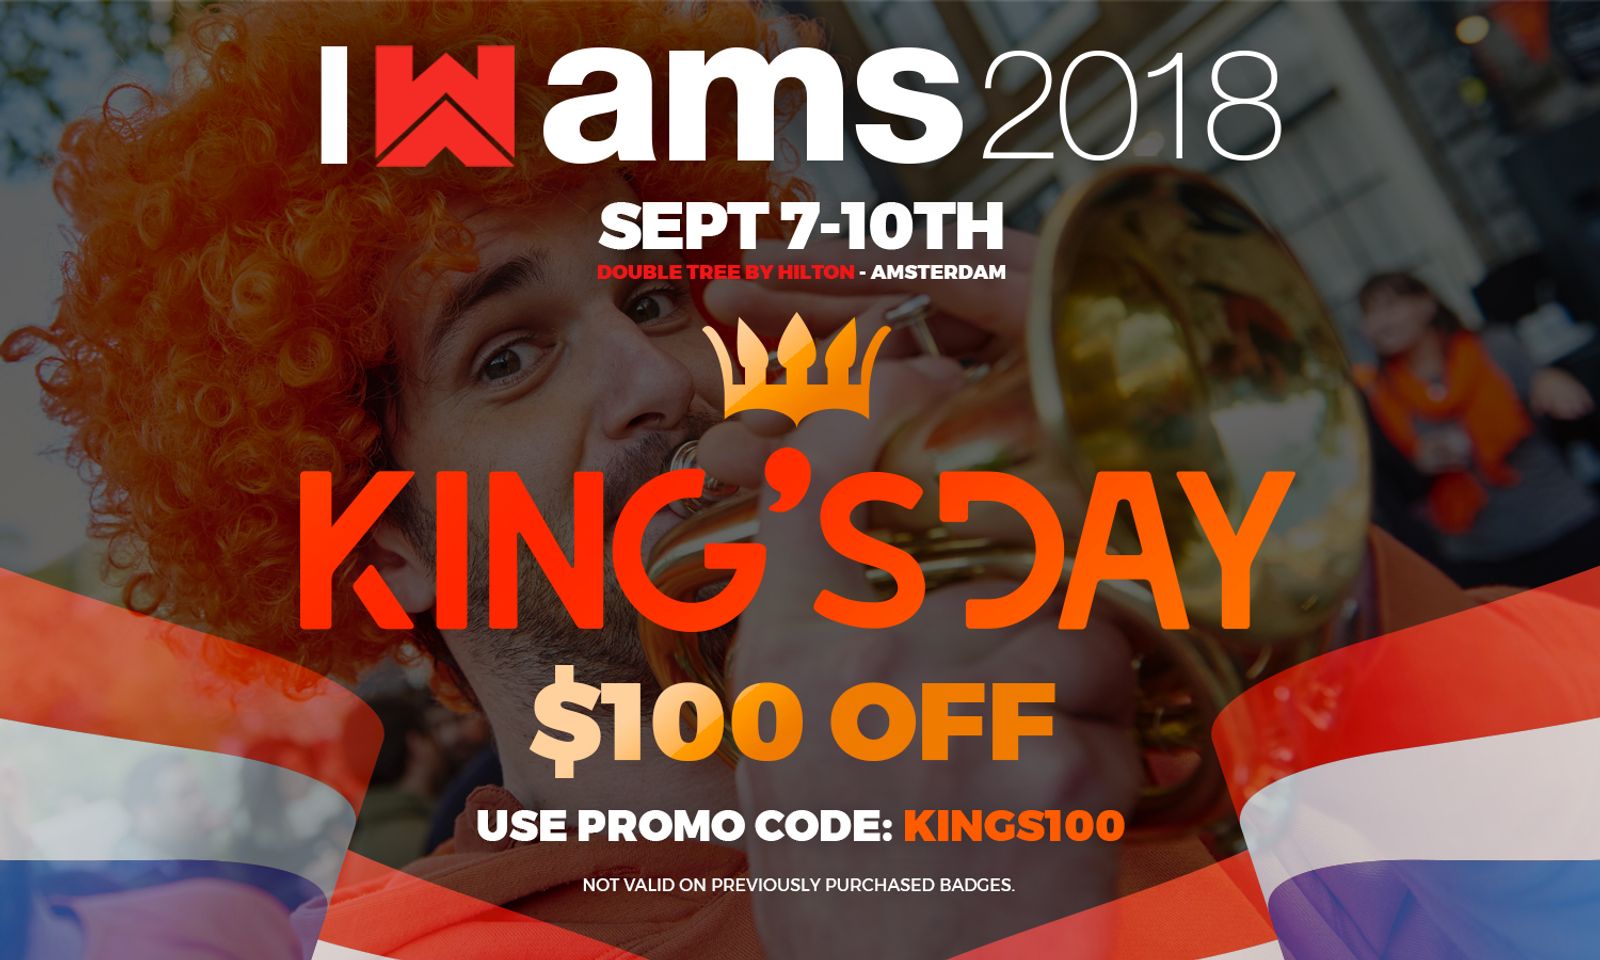 Webmaster Access Salutes King's Day With Registration Discount